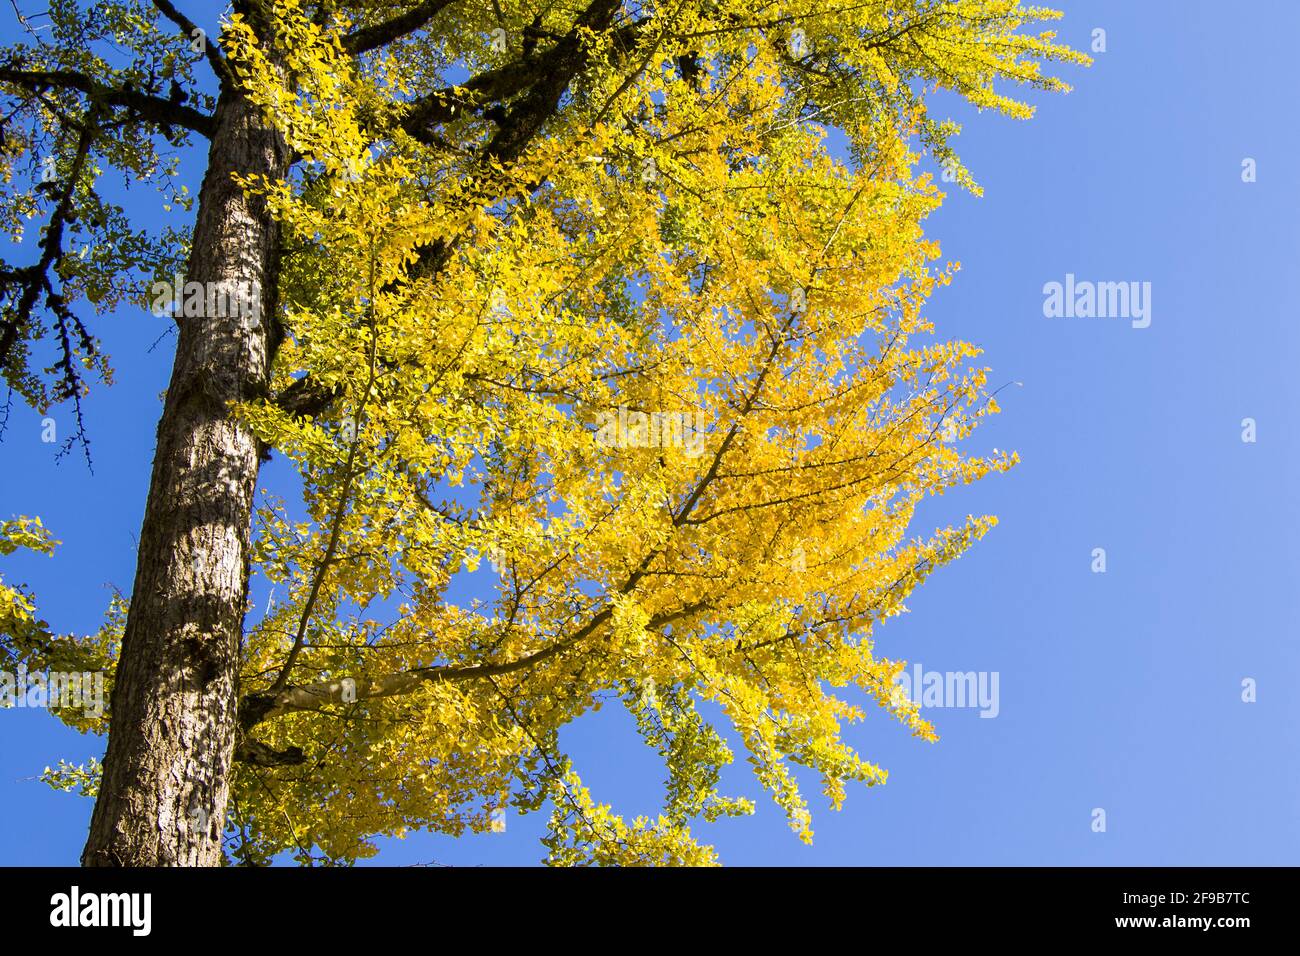 Natural view of autumn ginkgo Biloba leaves on a tree under a clear blue sky background Stock Photo